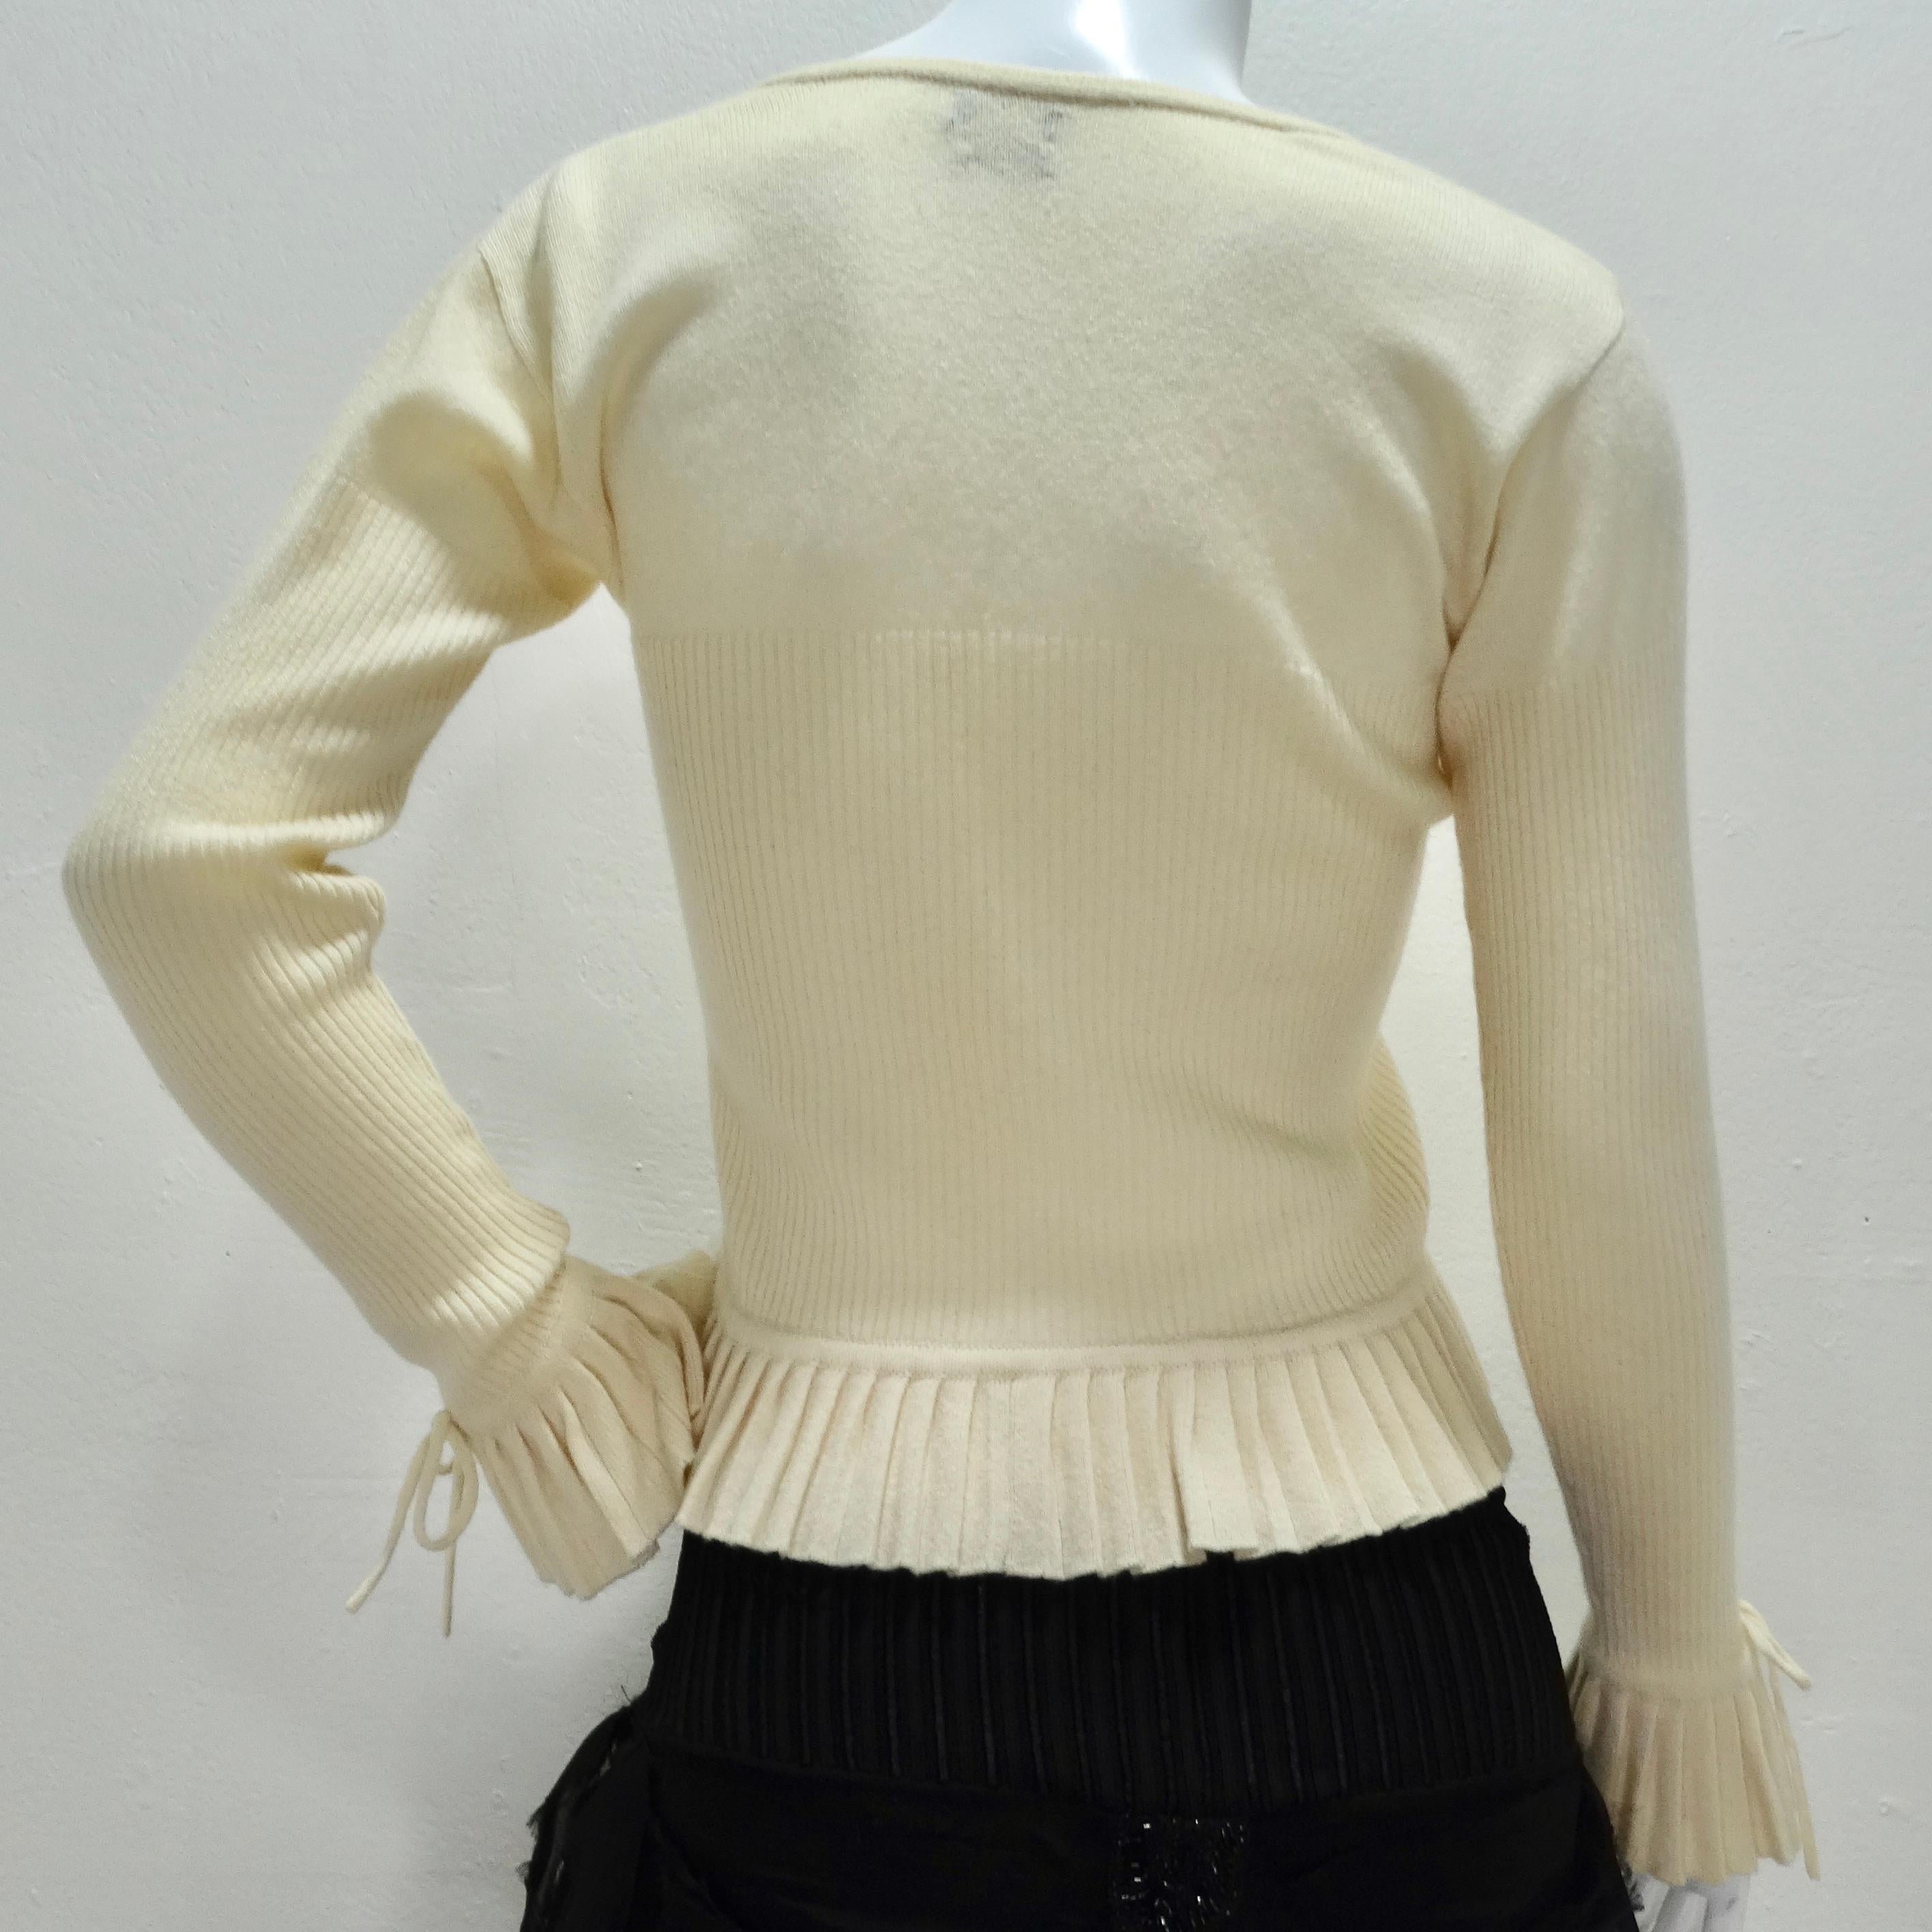 Chanel 1990s Ruffle Trim Tie Knit Cashmere Sweater  For Sale 5